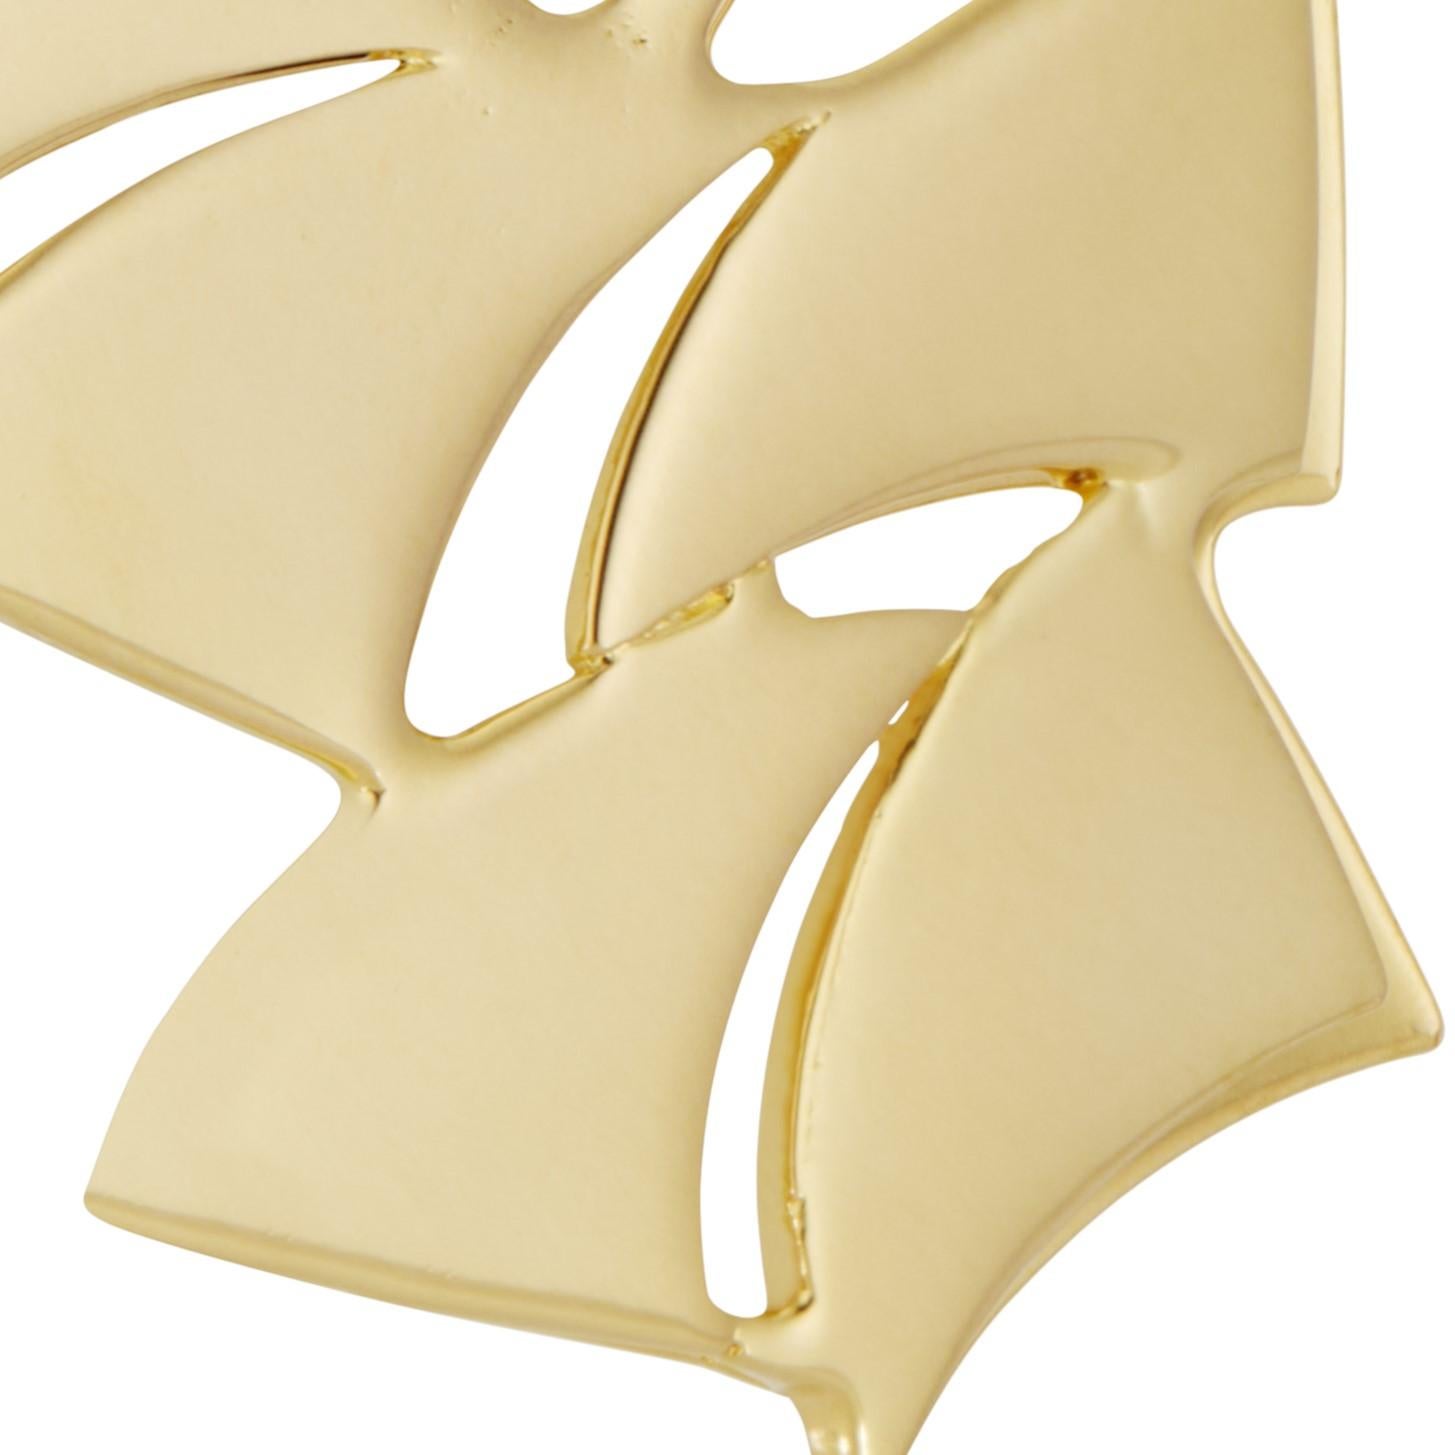 The Shark Tooth Plate Earring is designed with care for the modern jewelry lover who appreciates bold but timeless pieces with a sophisticated edge.  

Size 7- Ring Size is customizable.

All items are made to order, please allow 10-15 business days